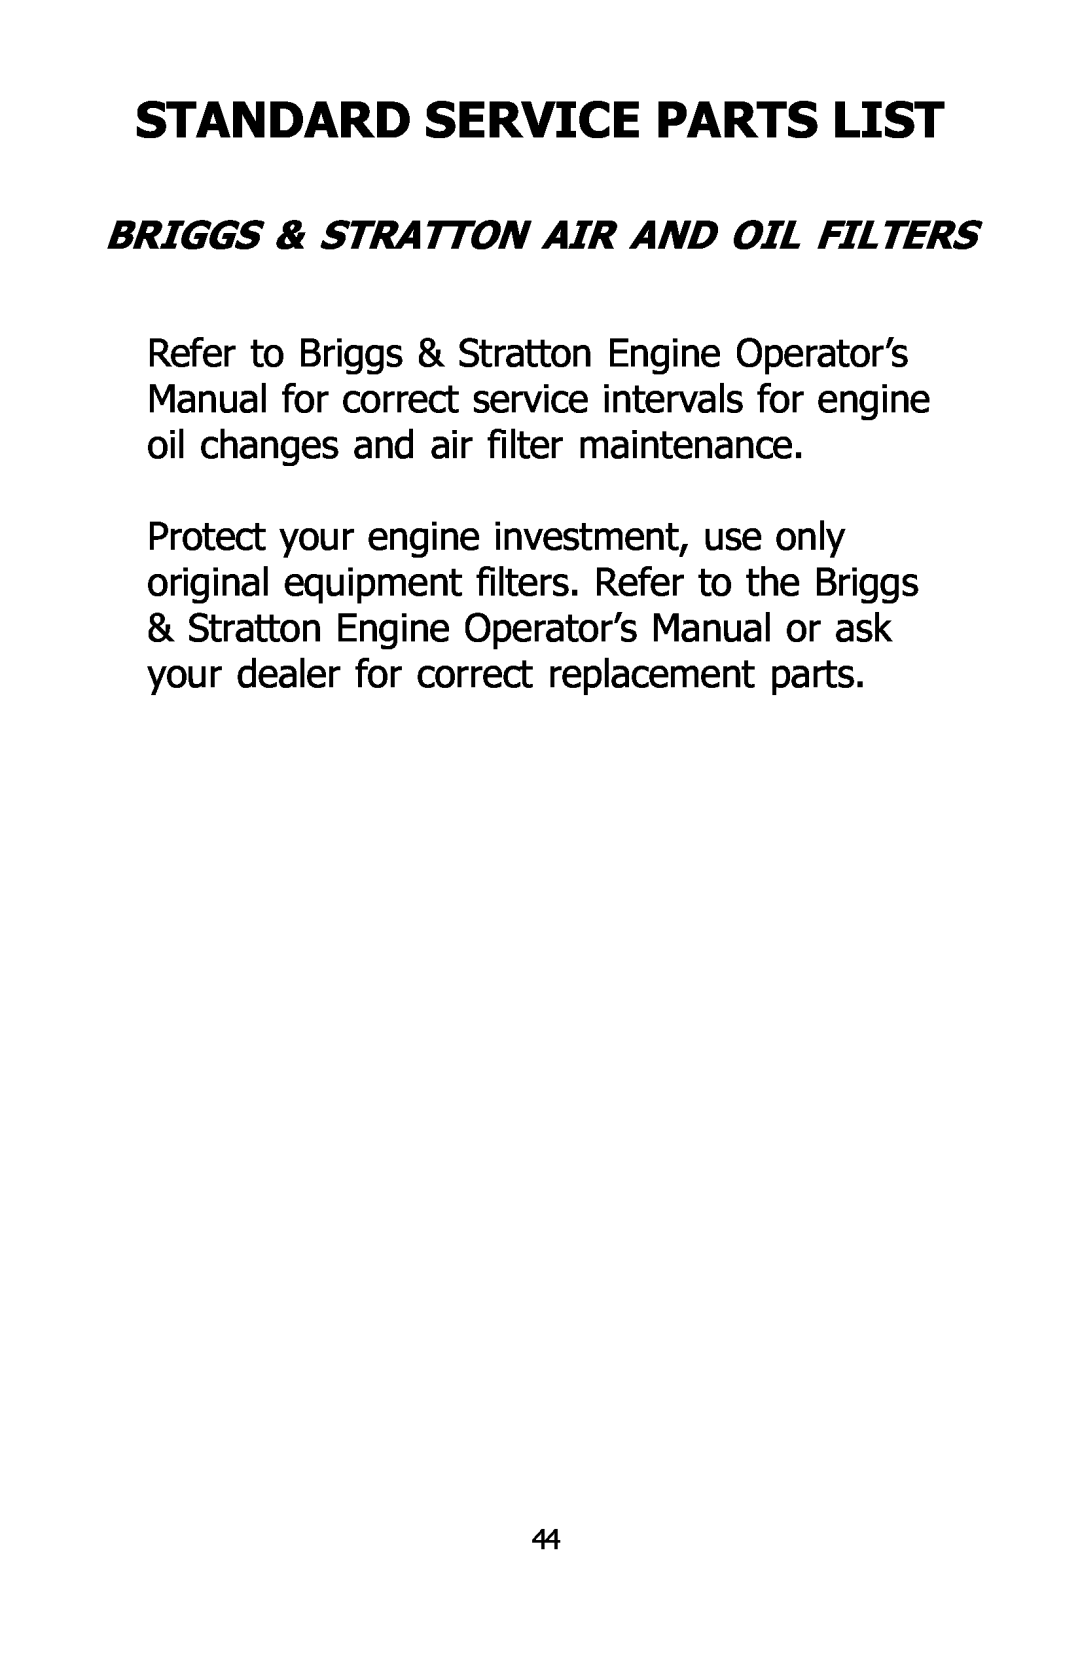 Dixon 16134-0803 manual Standard Service Parts List, Briggs & Stratton Air And Oil Filters 